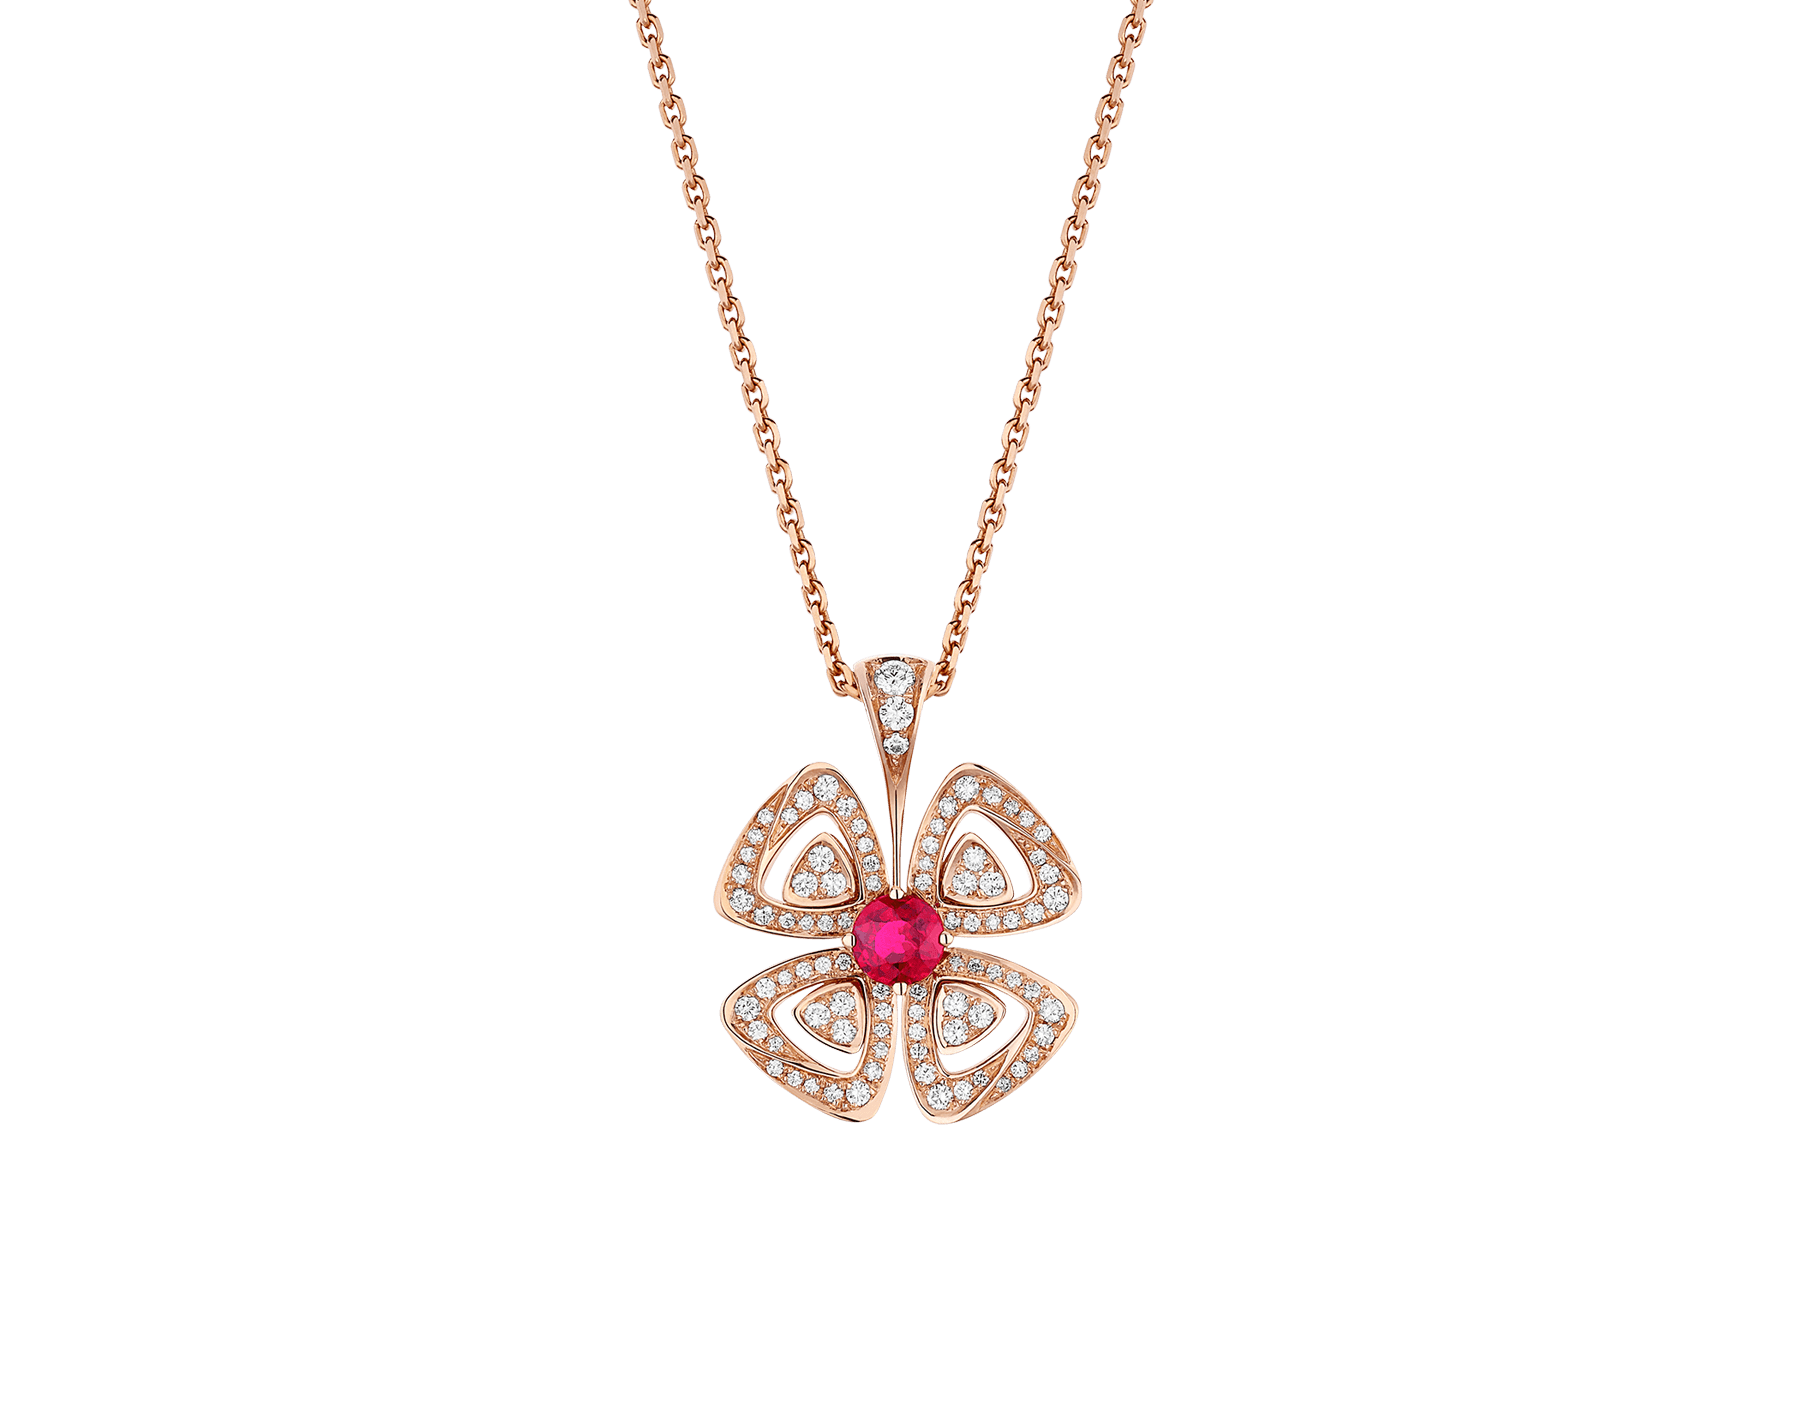 Fiorever 18 kt rose gold pendant necklace set with a central brilliant-cut ruby (0.35 ct) and pavé diamonds (0.31 ct) 358428 image 1